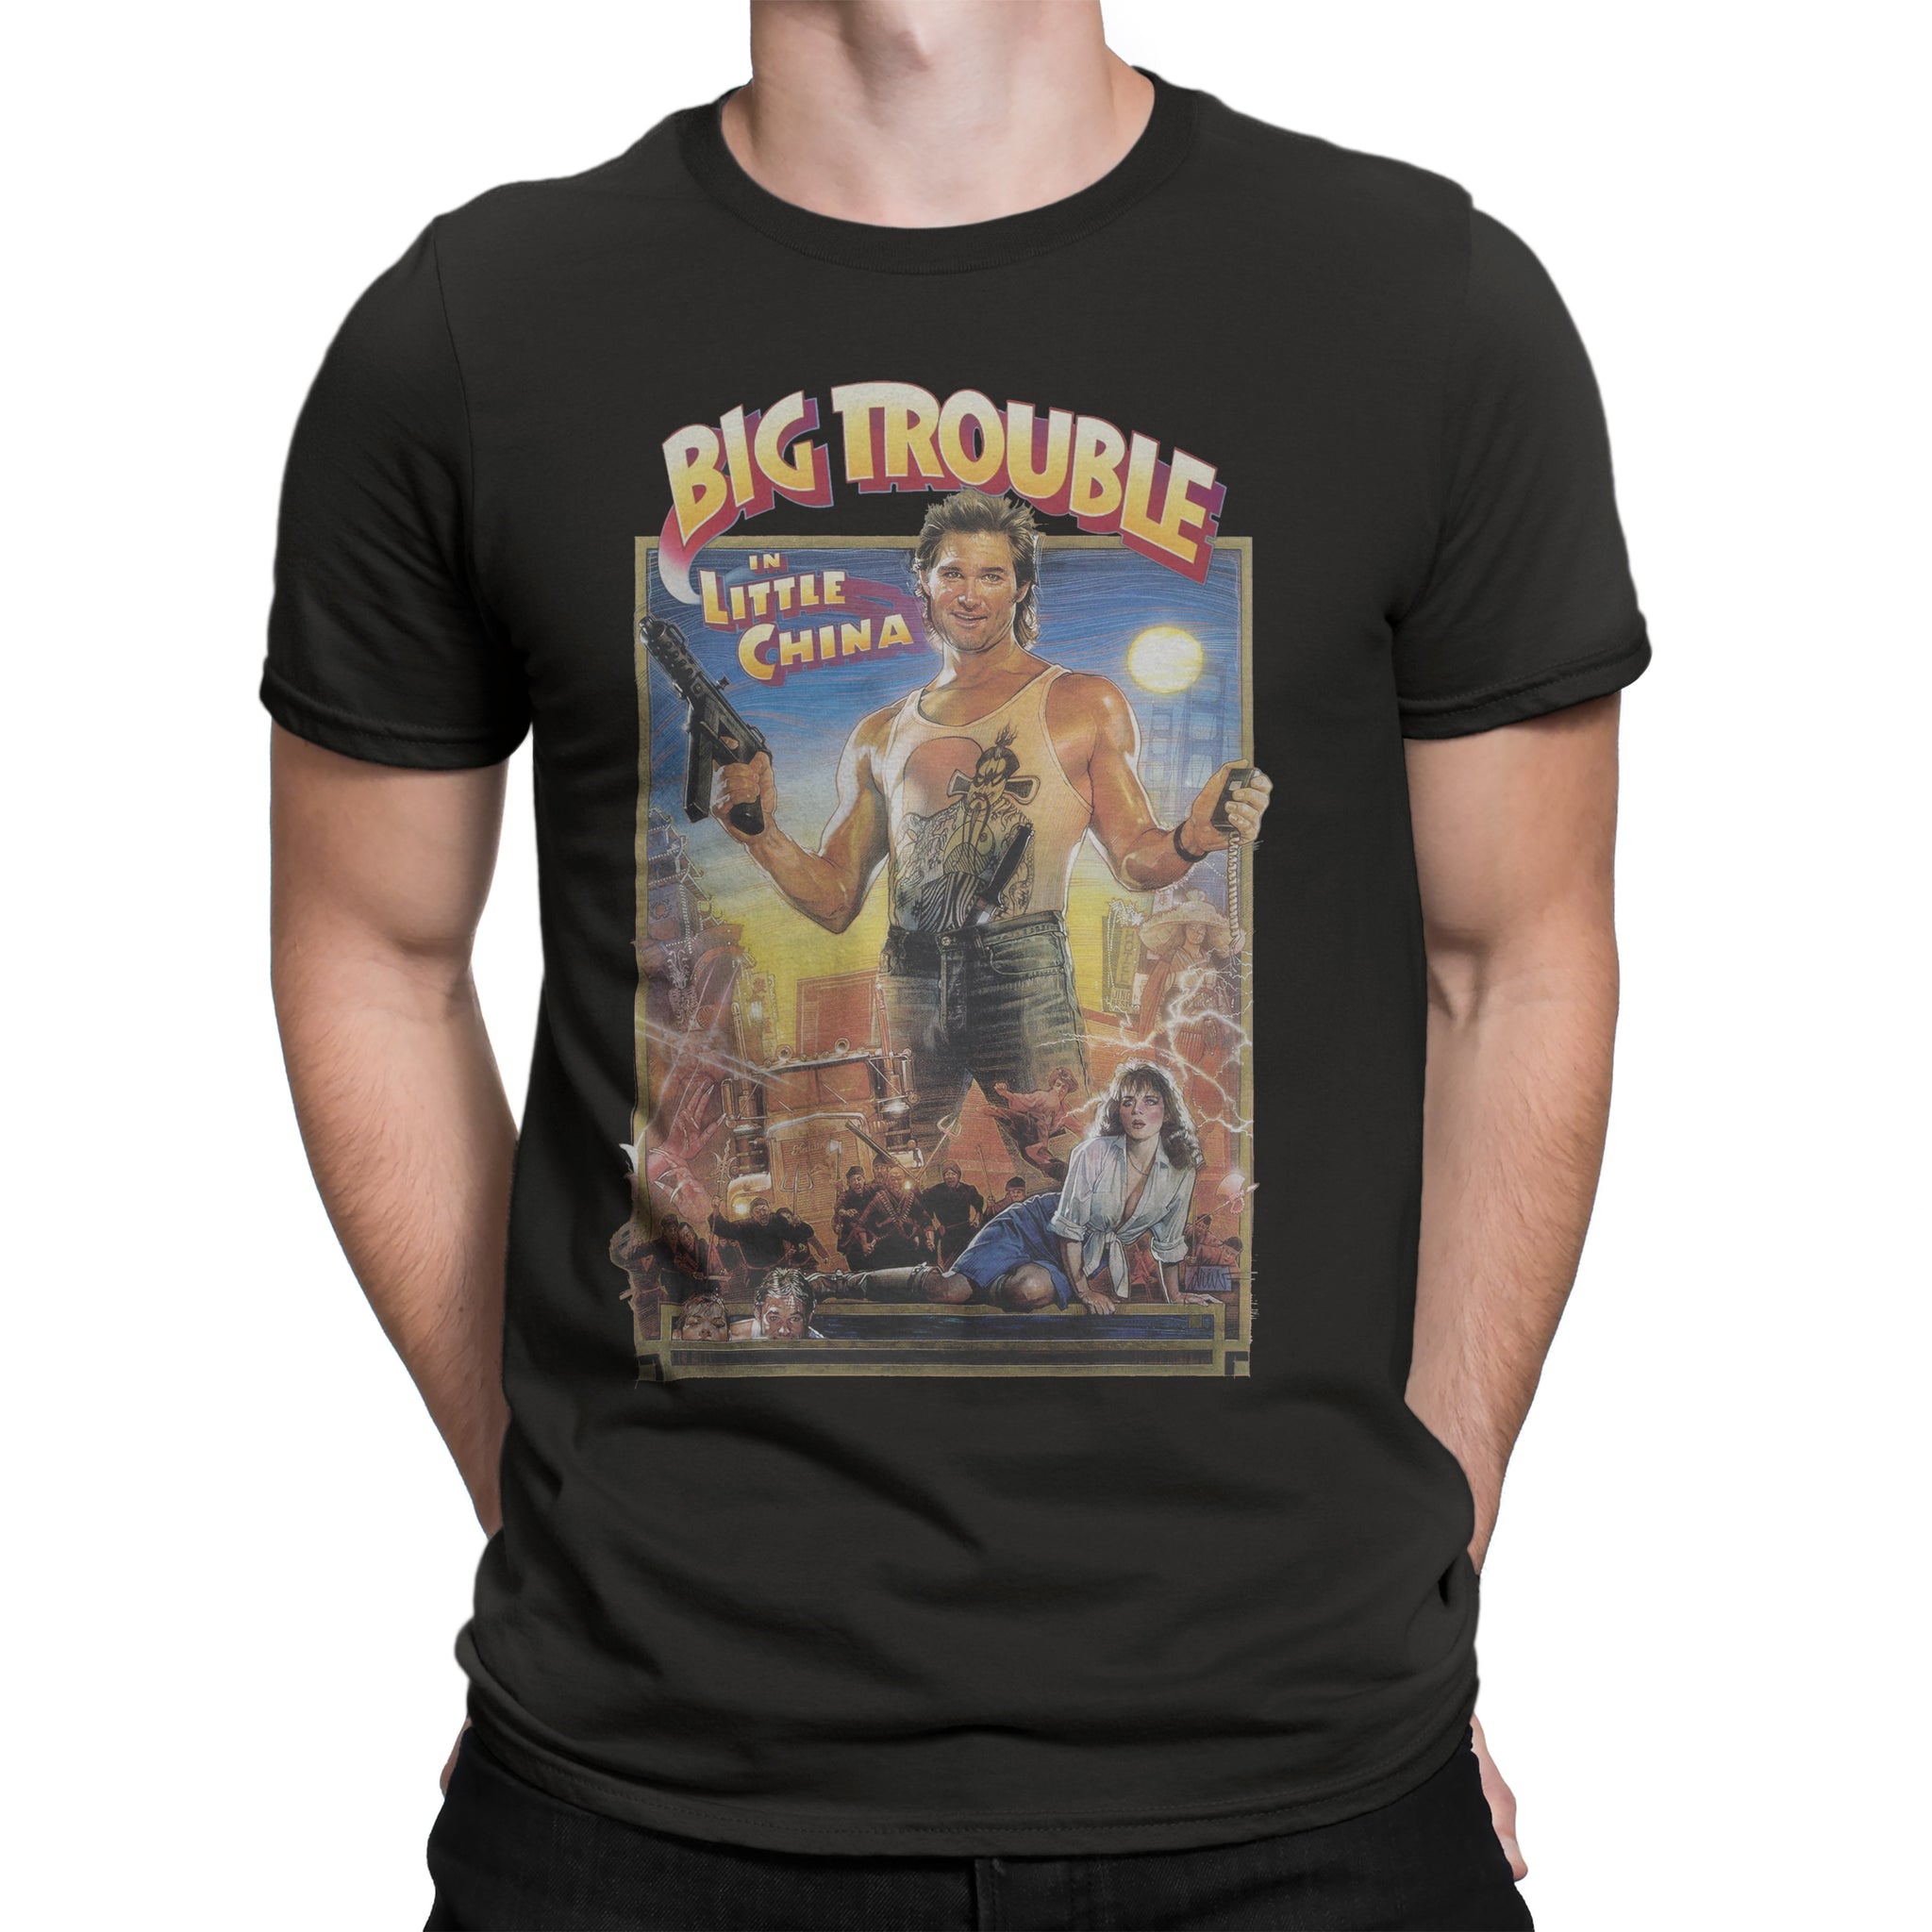 Big Trouble in Little China Tee